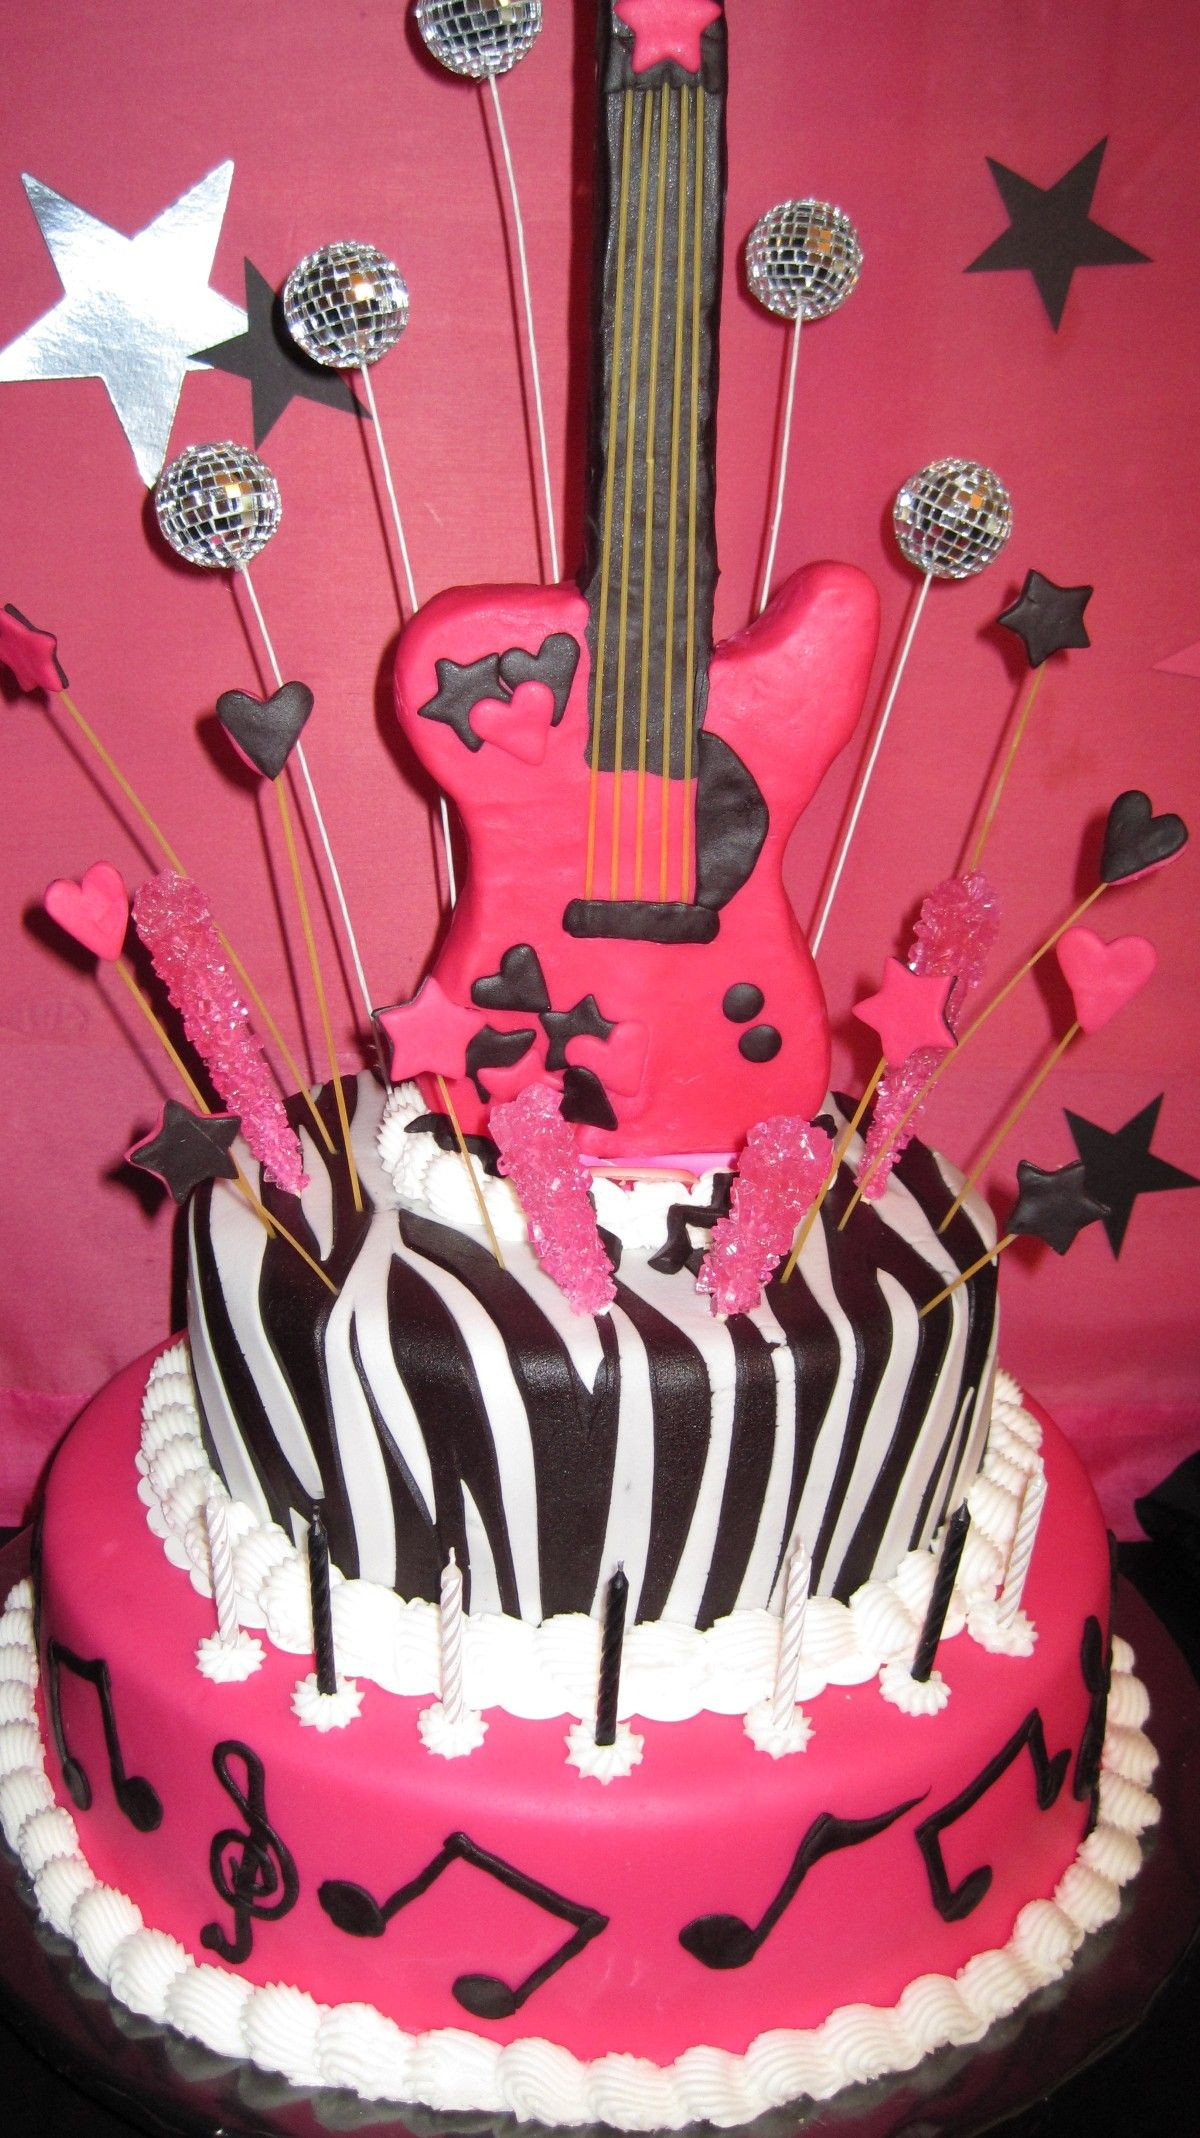 Rock Star Birthday Cake
 Rock star birthday cake idea for girls party in pink